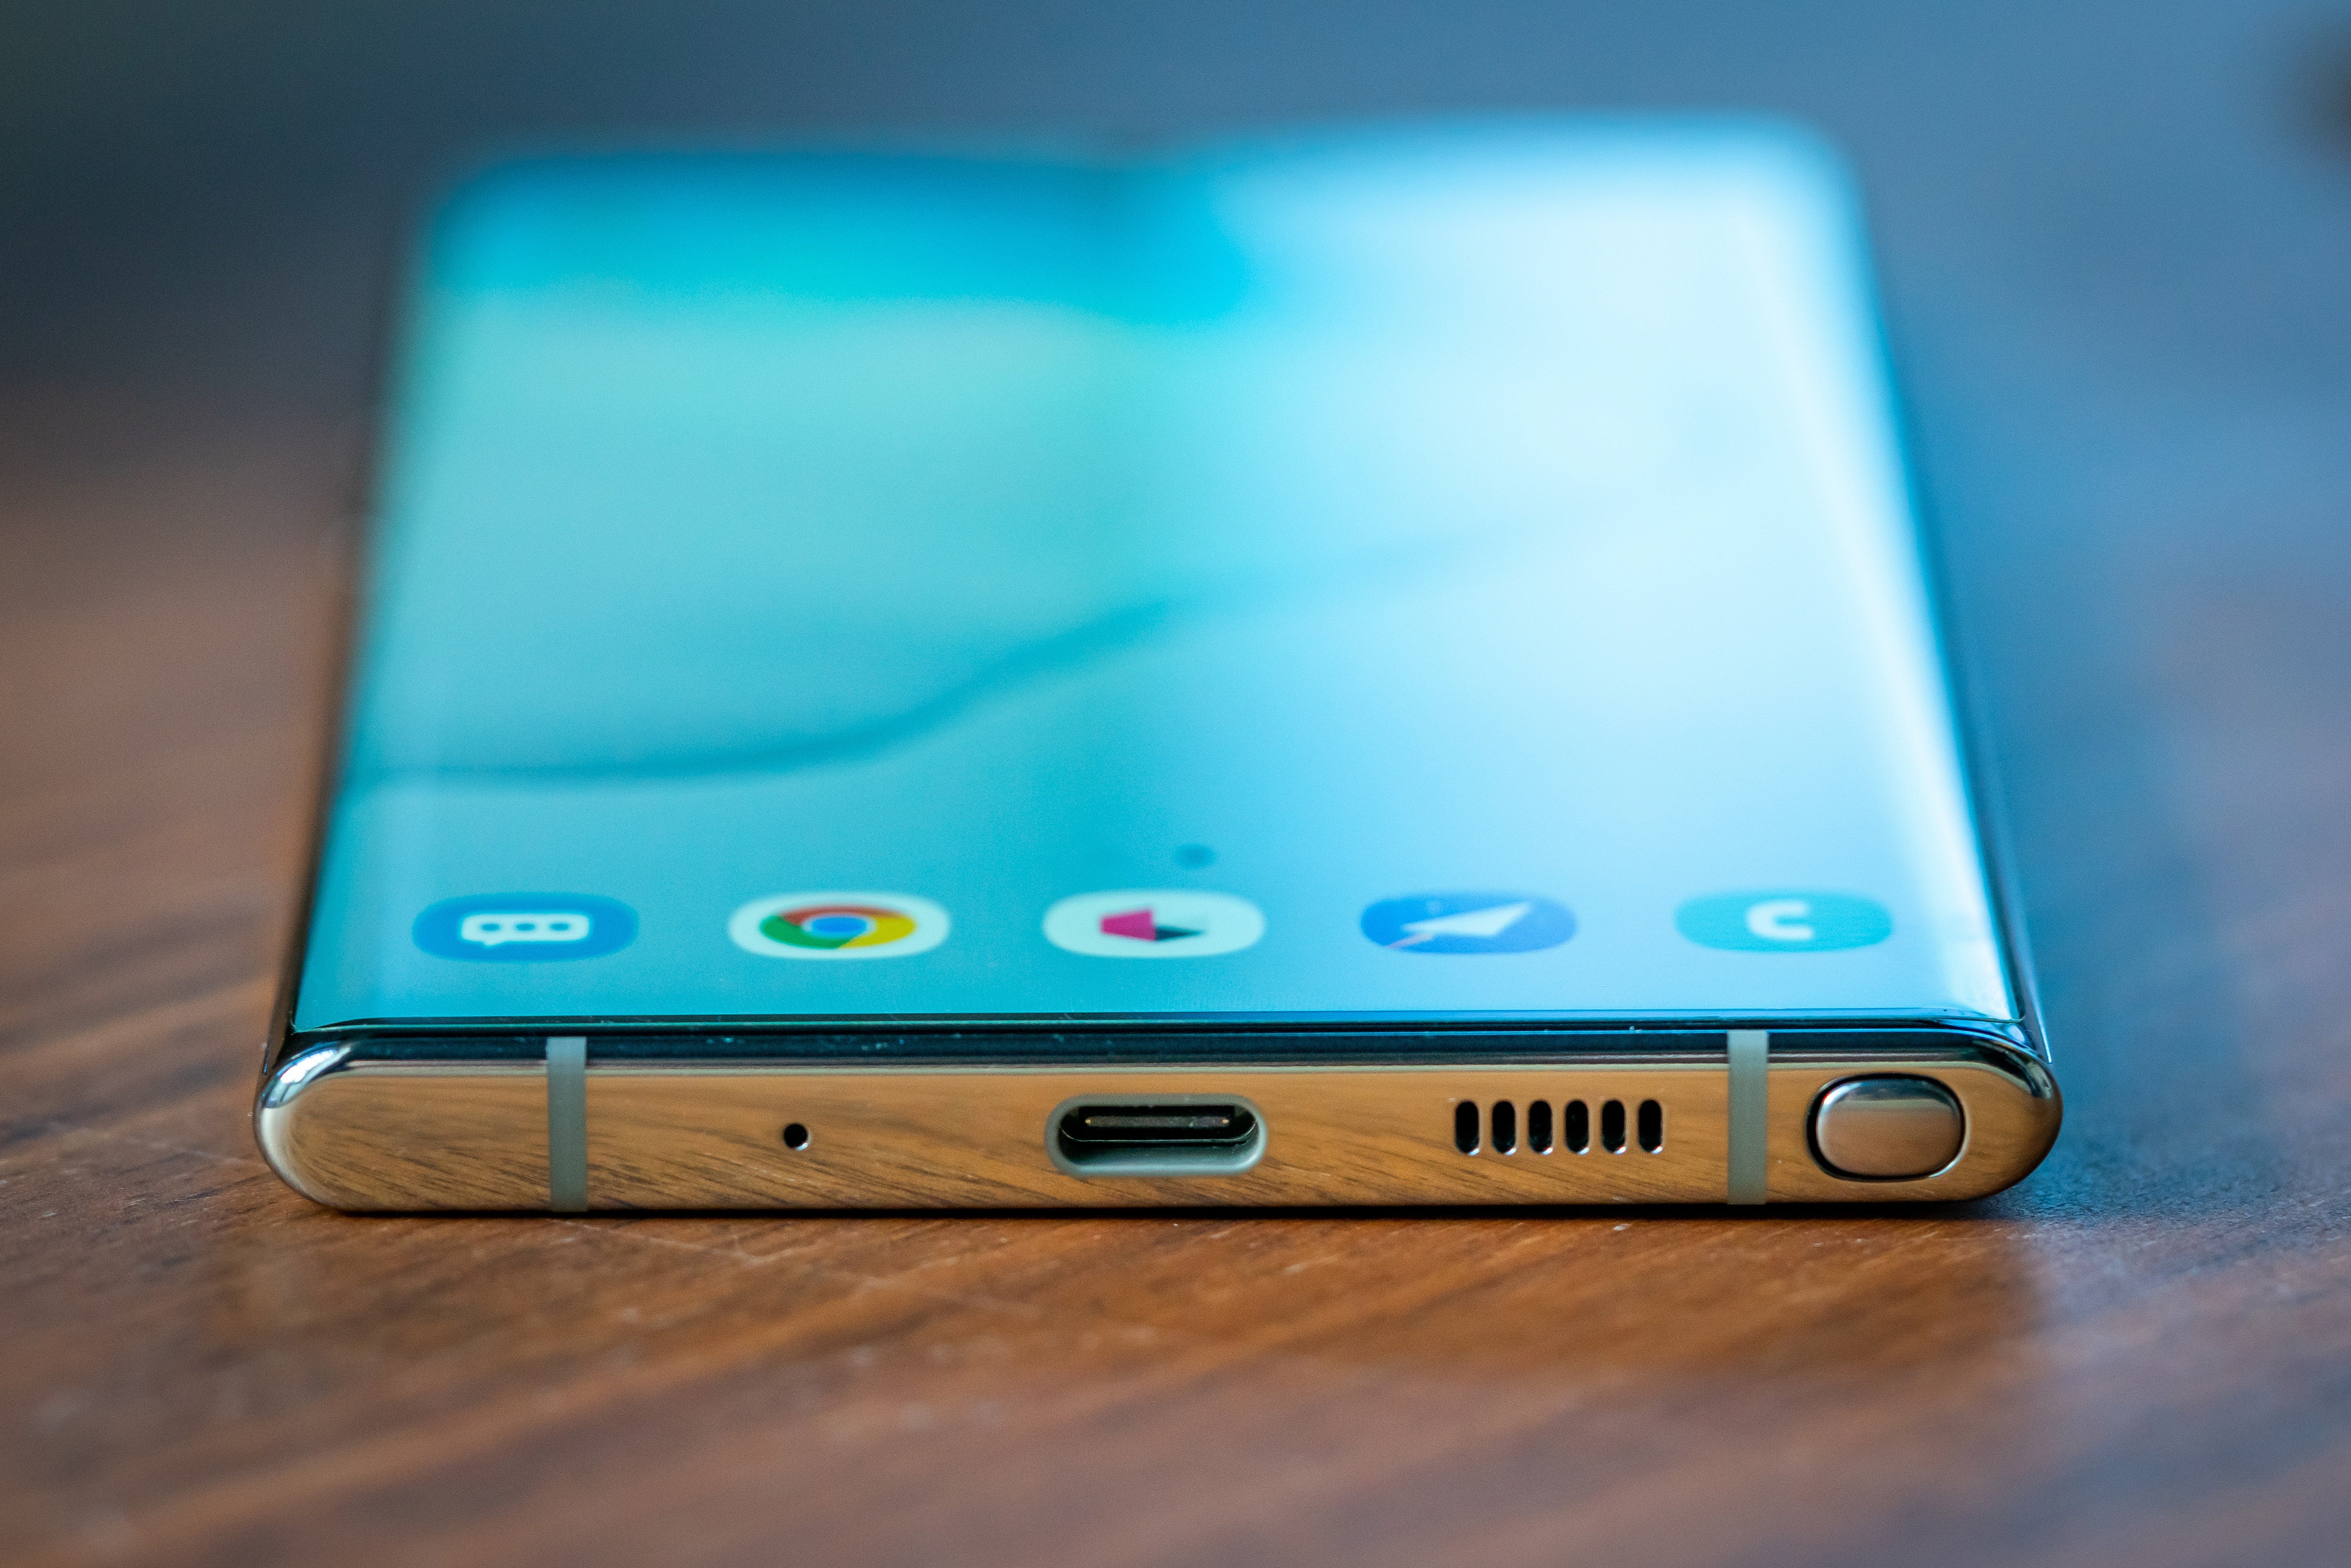 Samsung Galaxy Note 10+ review: If you have $1,100 to spend, this is ...